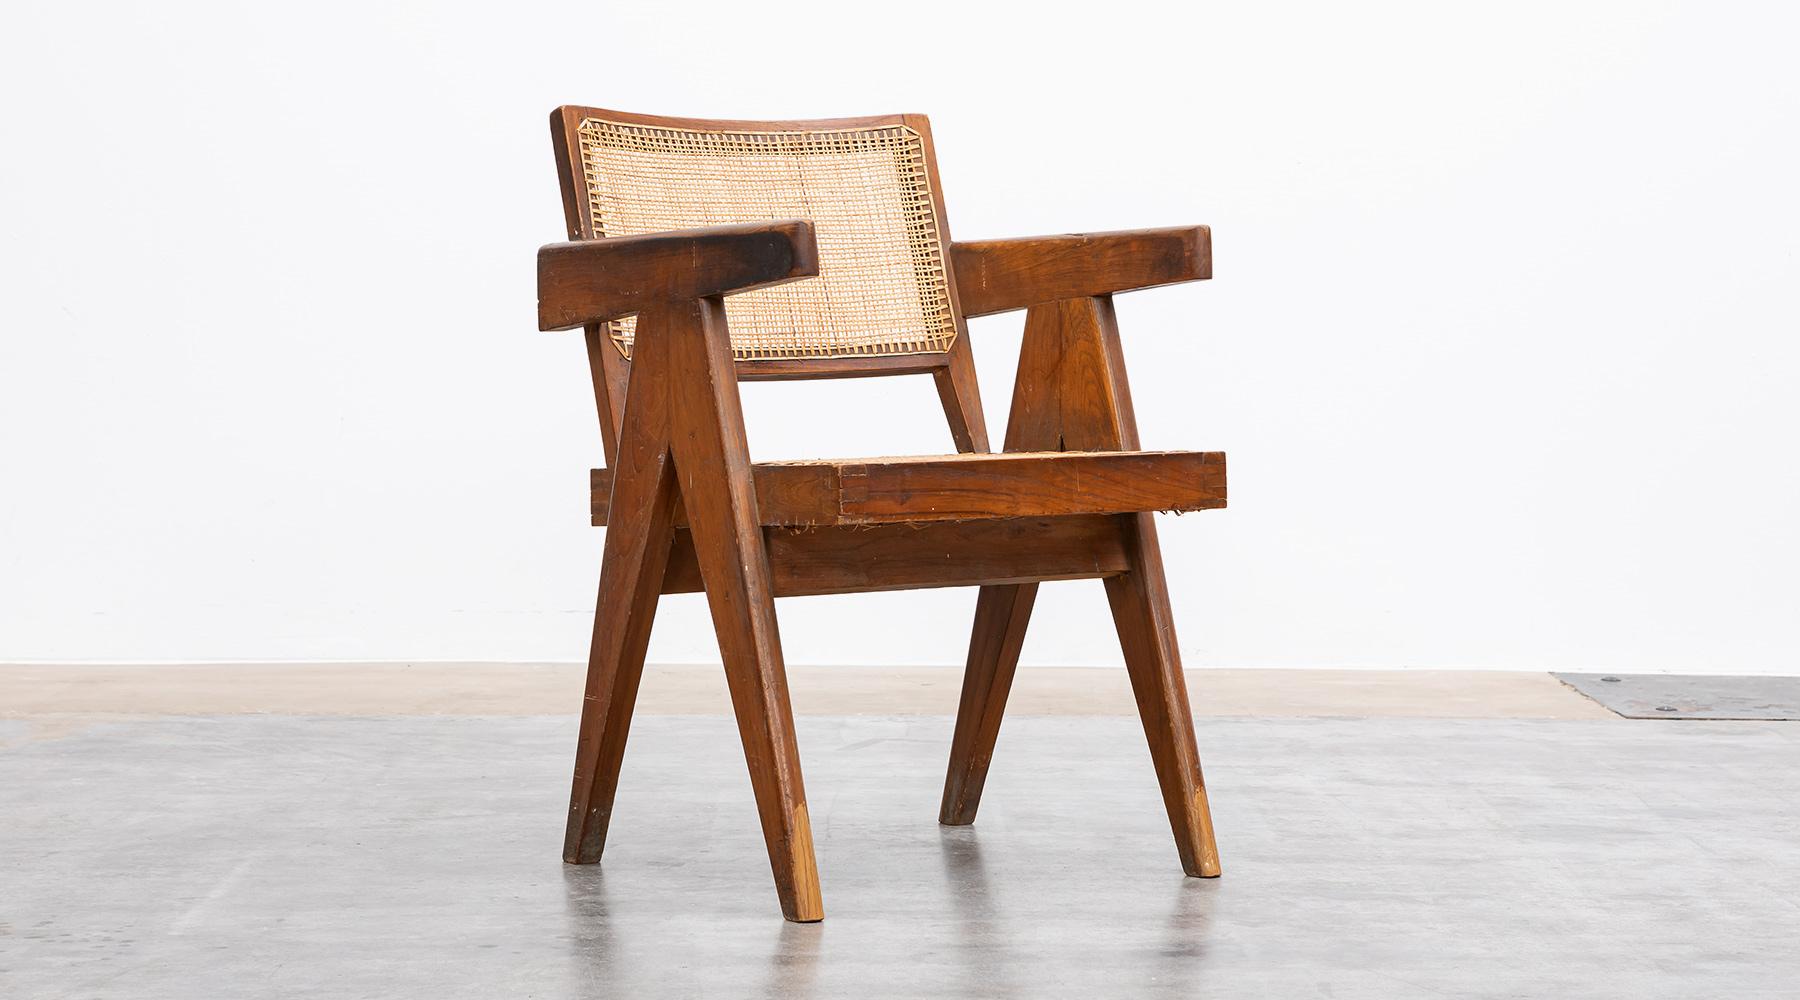 1950s Brown Wooden Teak and Cane Lounge Chair by Pierre Jeanneret 'c' For Sale 6